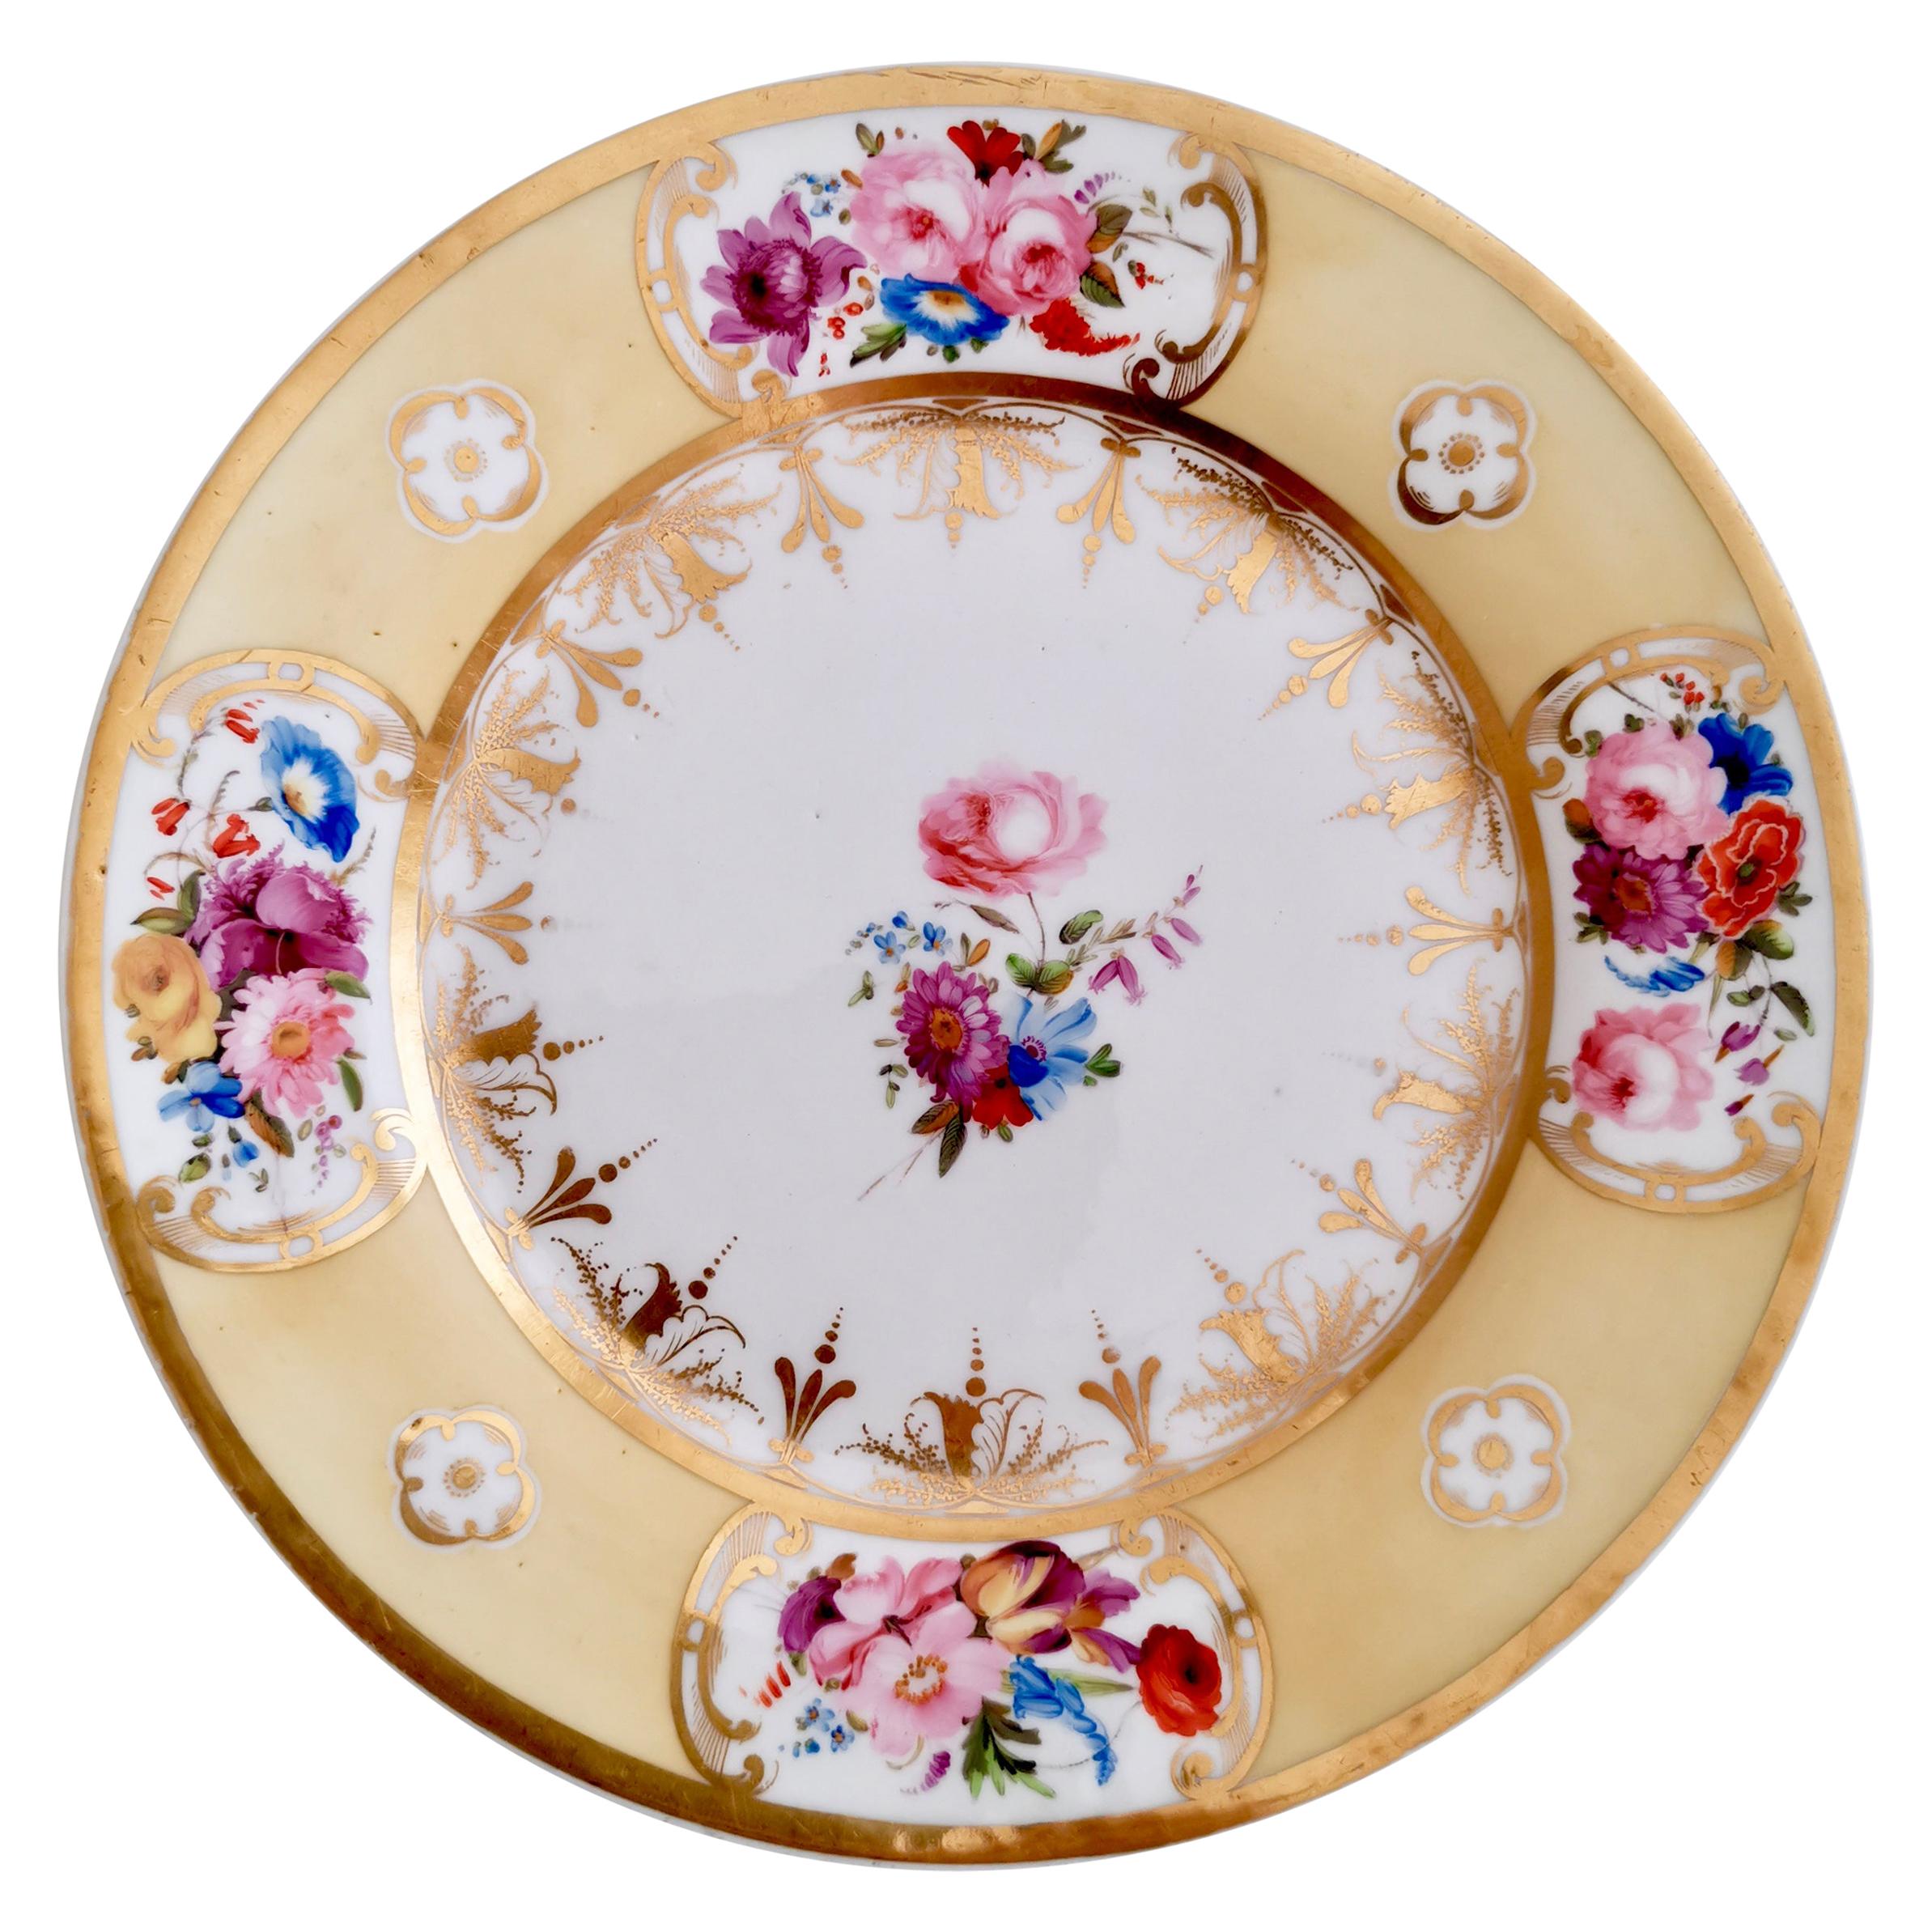 Coalport Plate, Yellow Ground with Hand Painted Flowers, circa 1820